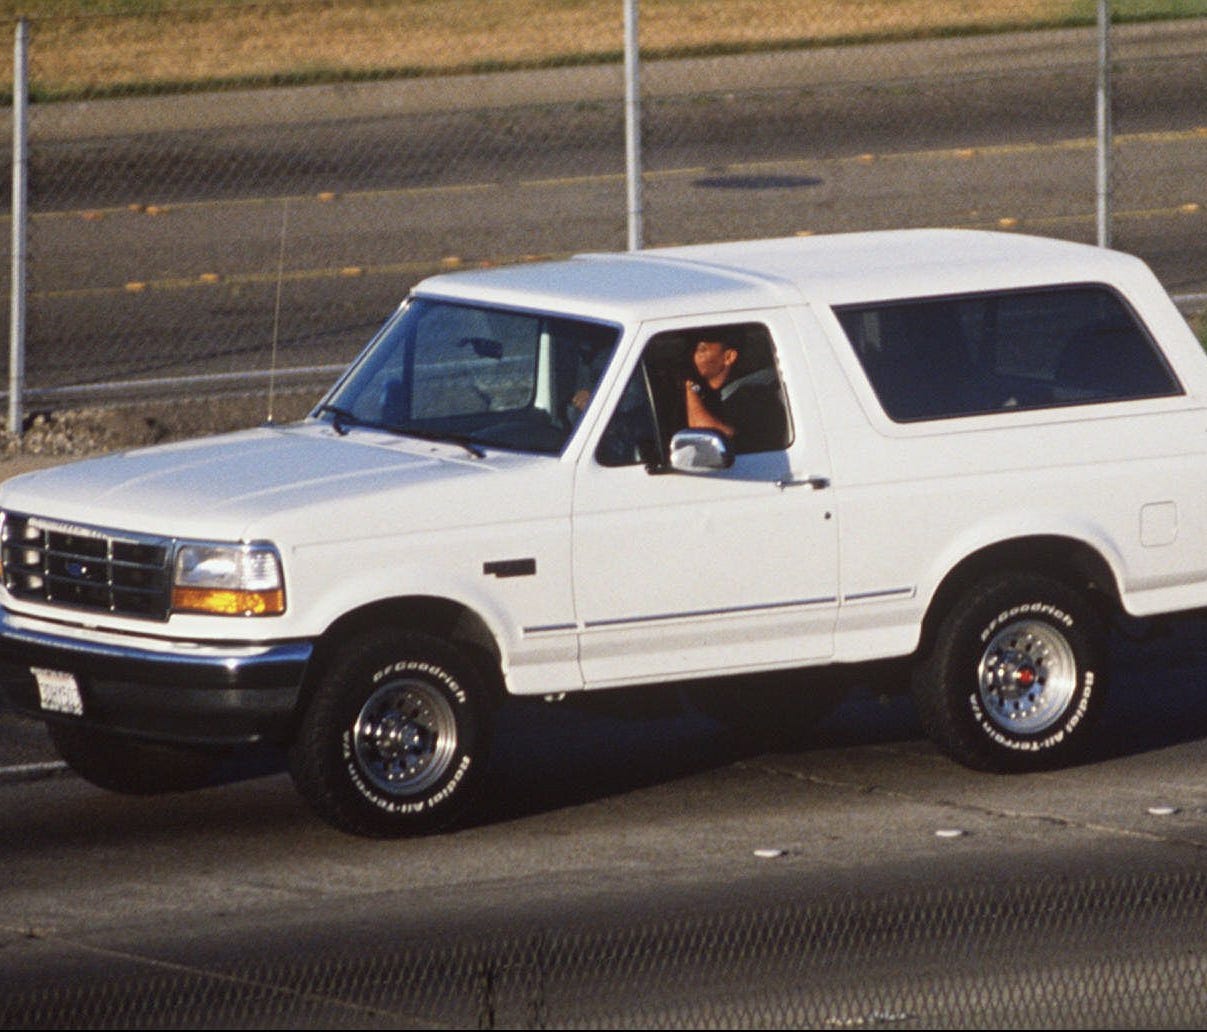 The white Ford Bronco made famous by O.J. Simpson and Al Cowlings will be featured on 